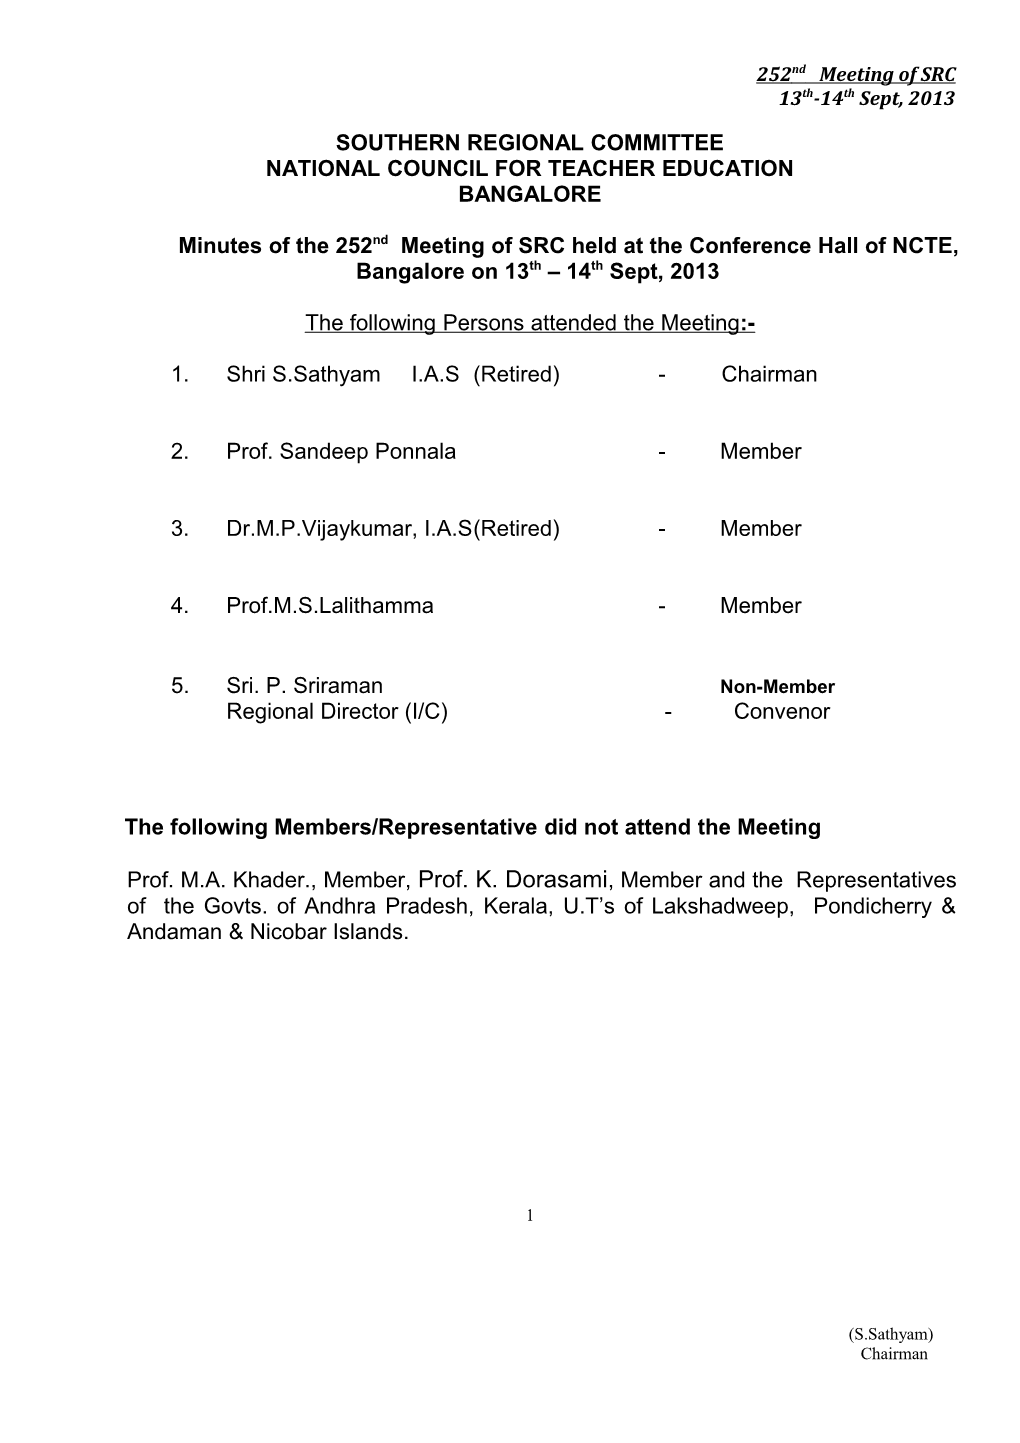 SUMMARY of 252Nd MEETING of SRC-NCTE